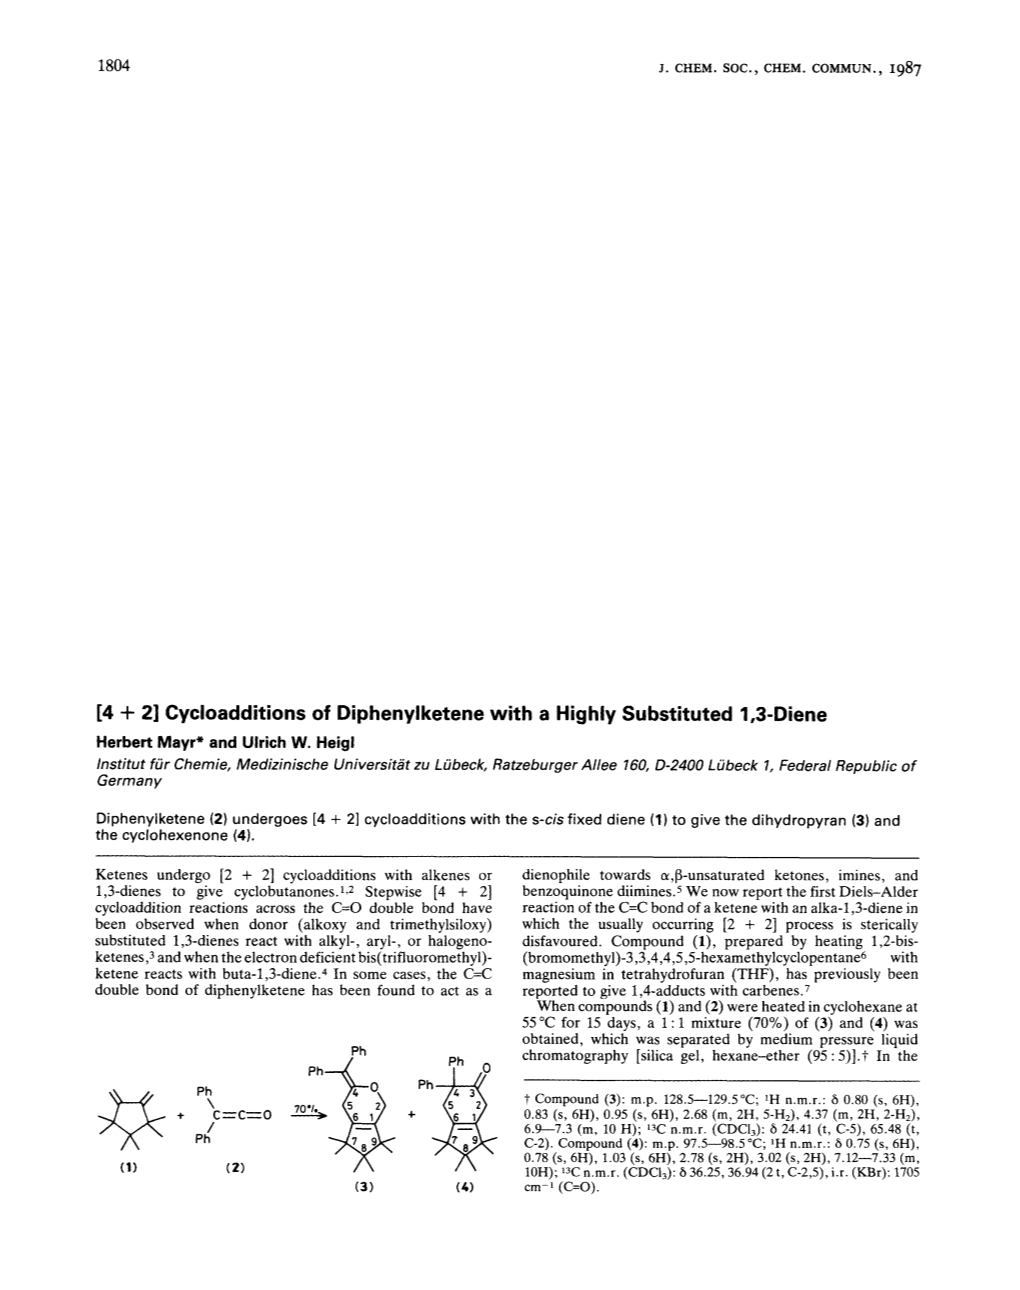 [4 + 21 Cycloadditions of Diphenylketene with a Highly Substituted 1,3-Diene Herbert Mayr* and Ulrich W